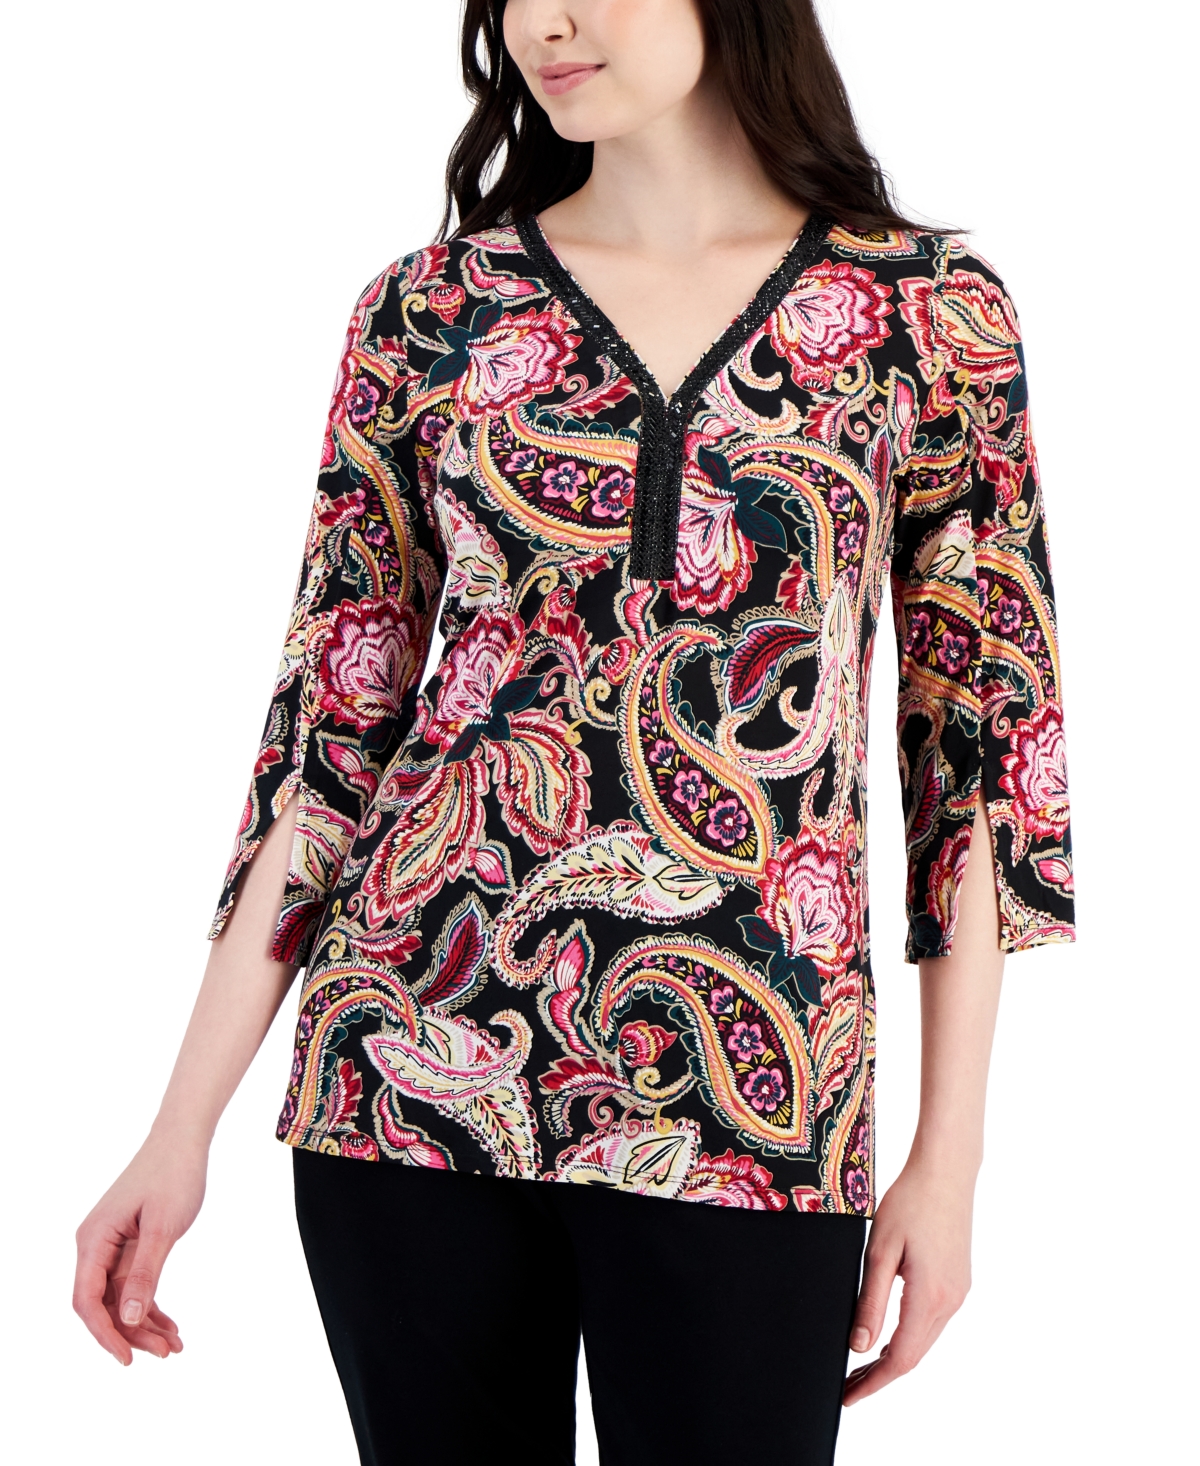 Jm Collection Women's Embellished Paisley-Print 3/4-Sleeve Top, Created for Macy's